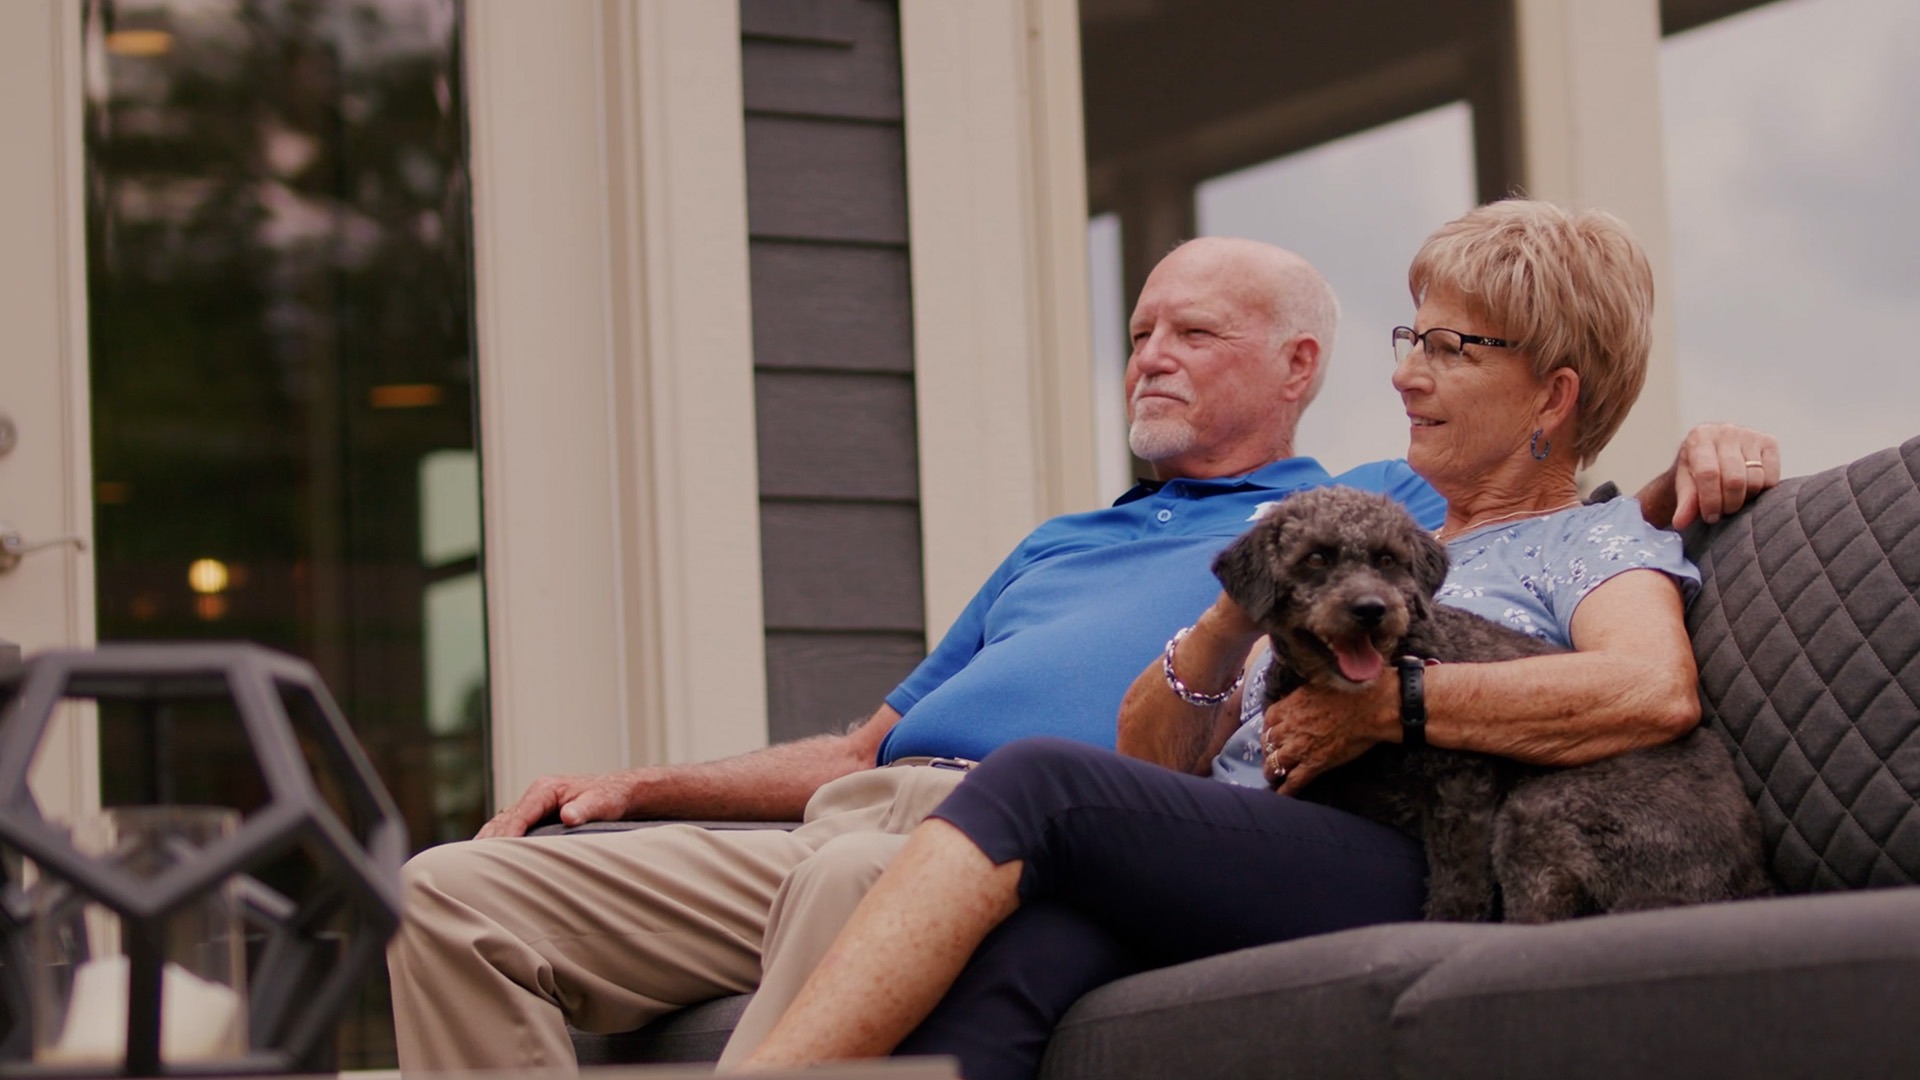 Epcon homeowners Steve and Bobbi enjoy the low-maintenance living offered in their new community.